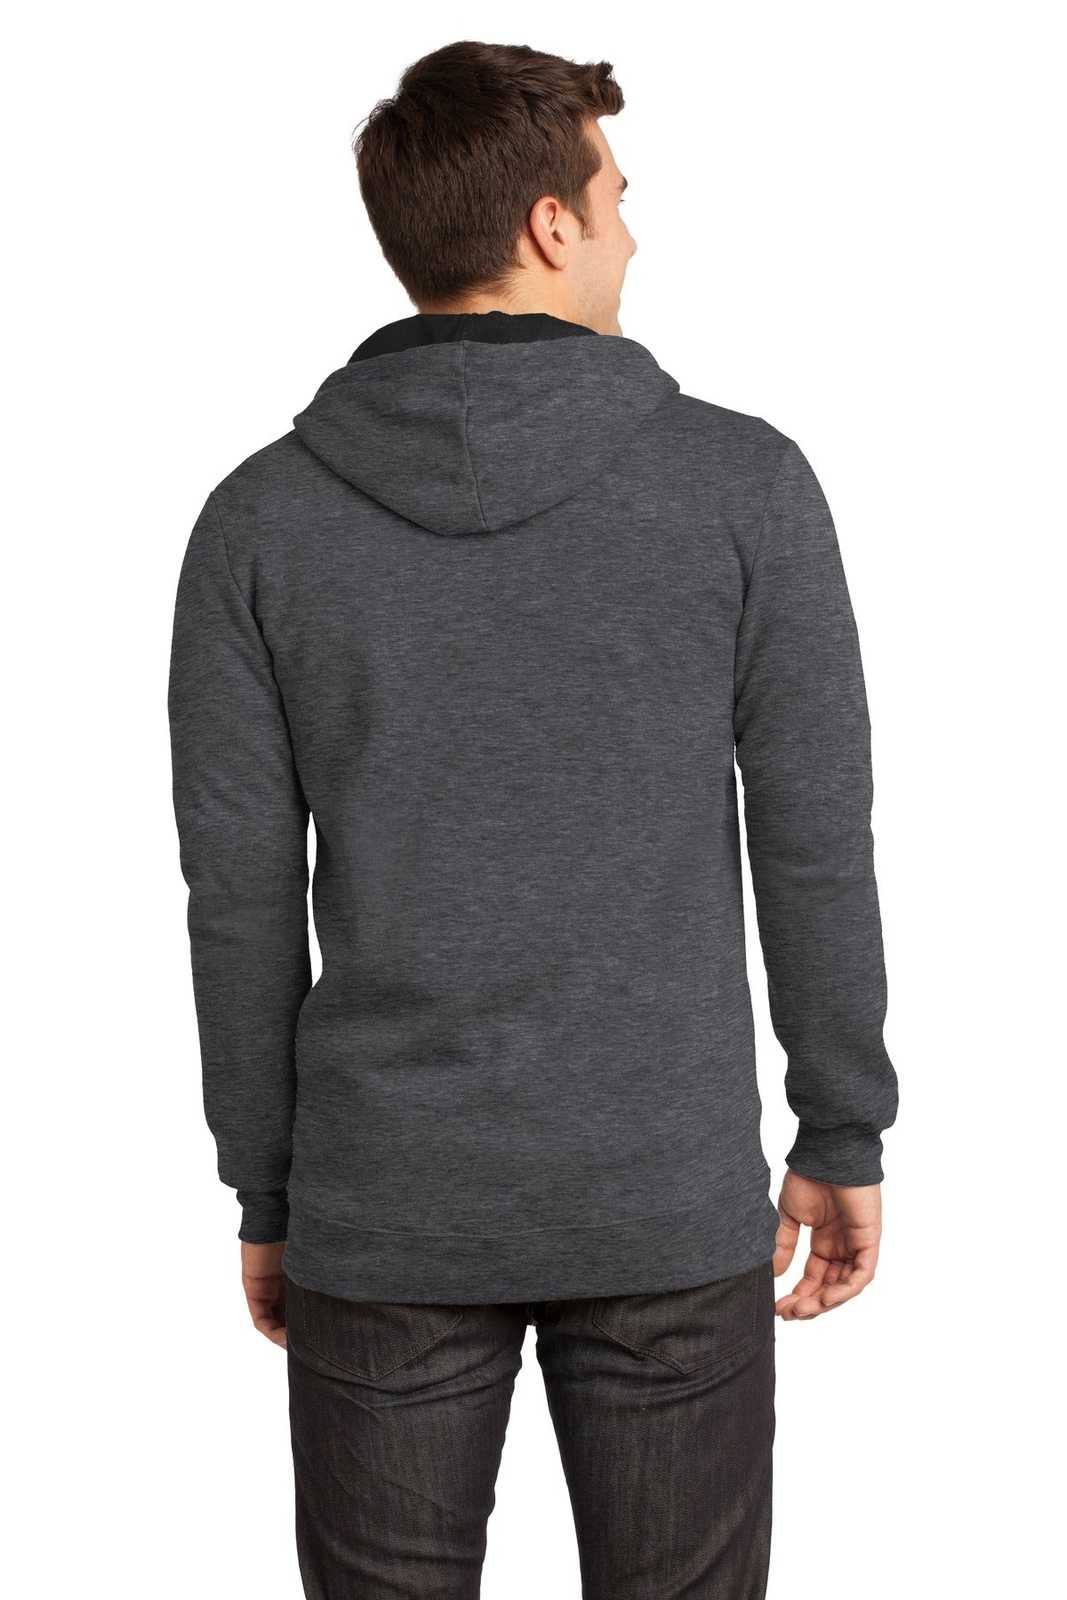 District DT800 The Concert Fleece Full-Zip Hoodie - Heathered Charcoal - HIT a Double - 2